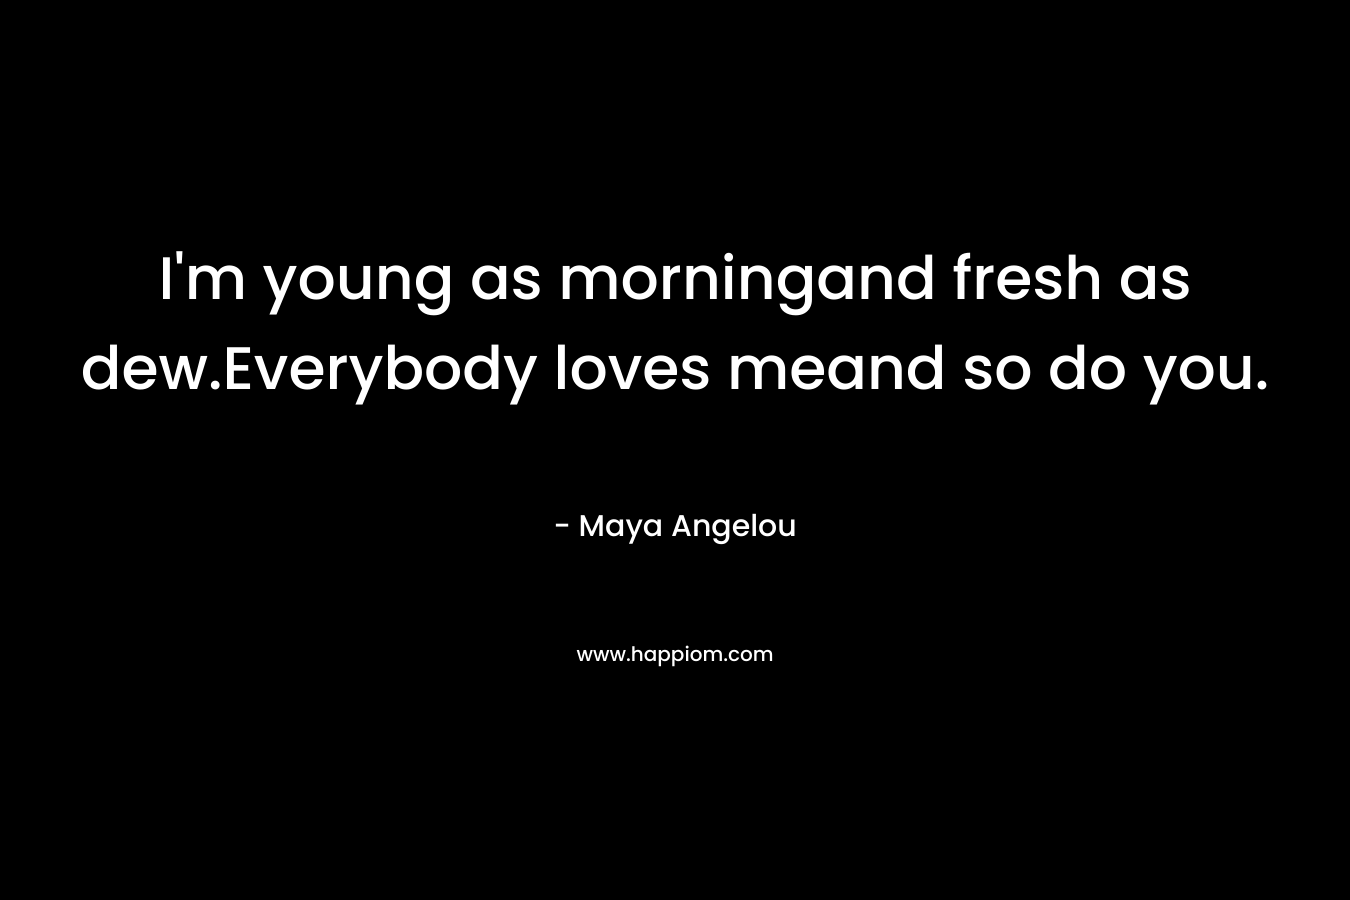 I’m young as morningand fresh as dew.Everybody loves meand so do you. – Maya Angelou